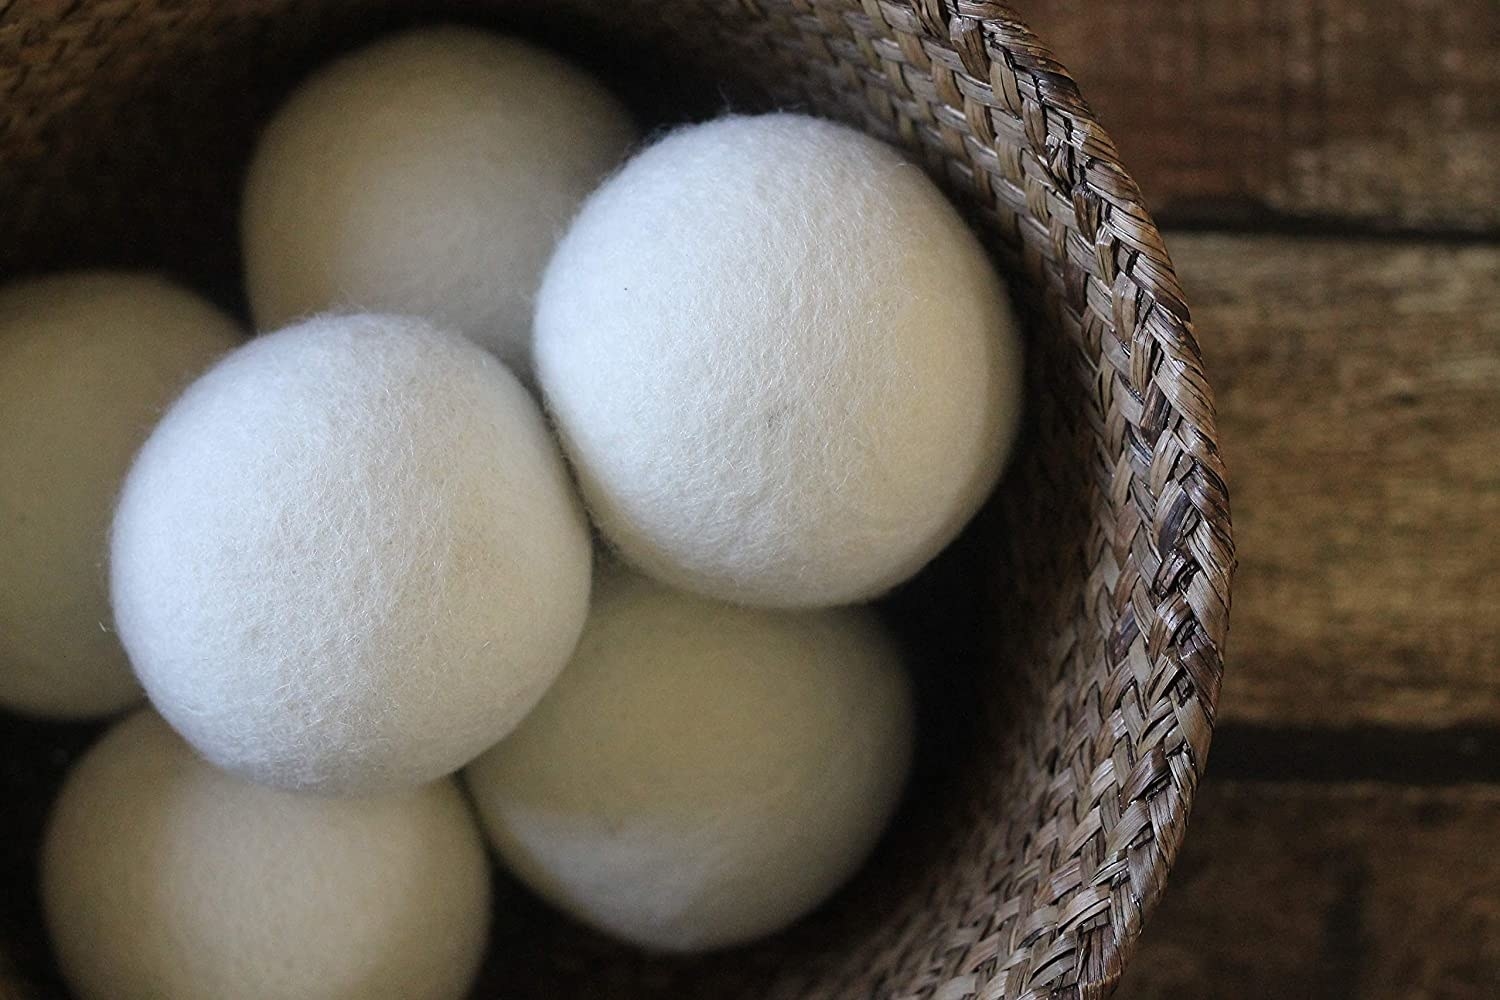 The six white dryer balls in a basket